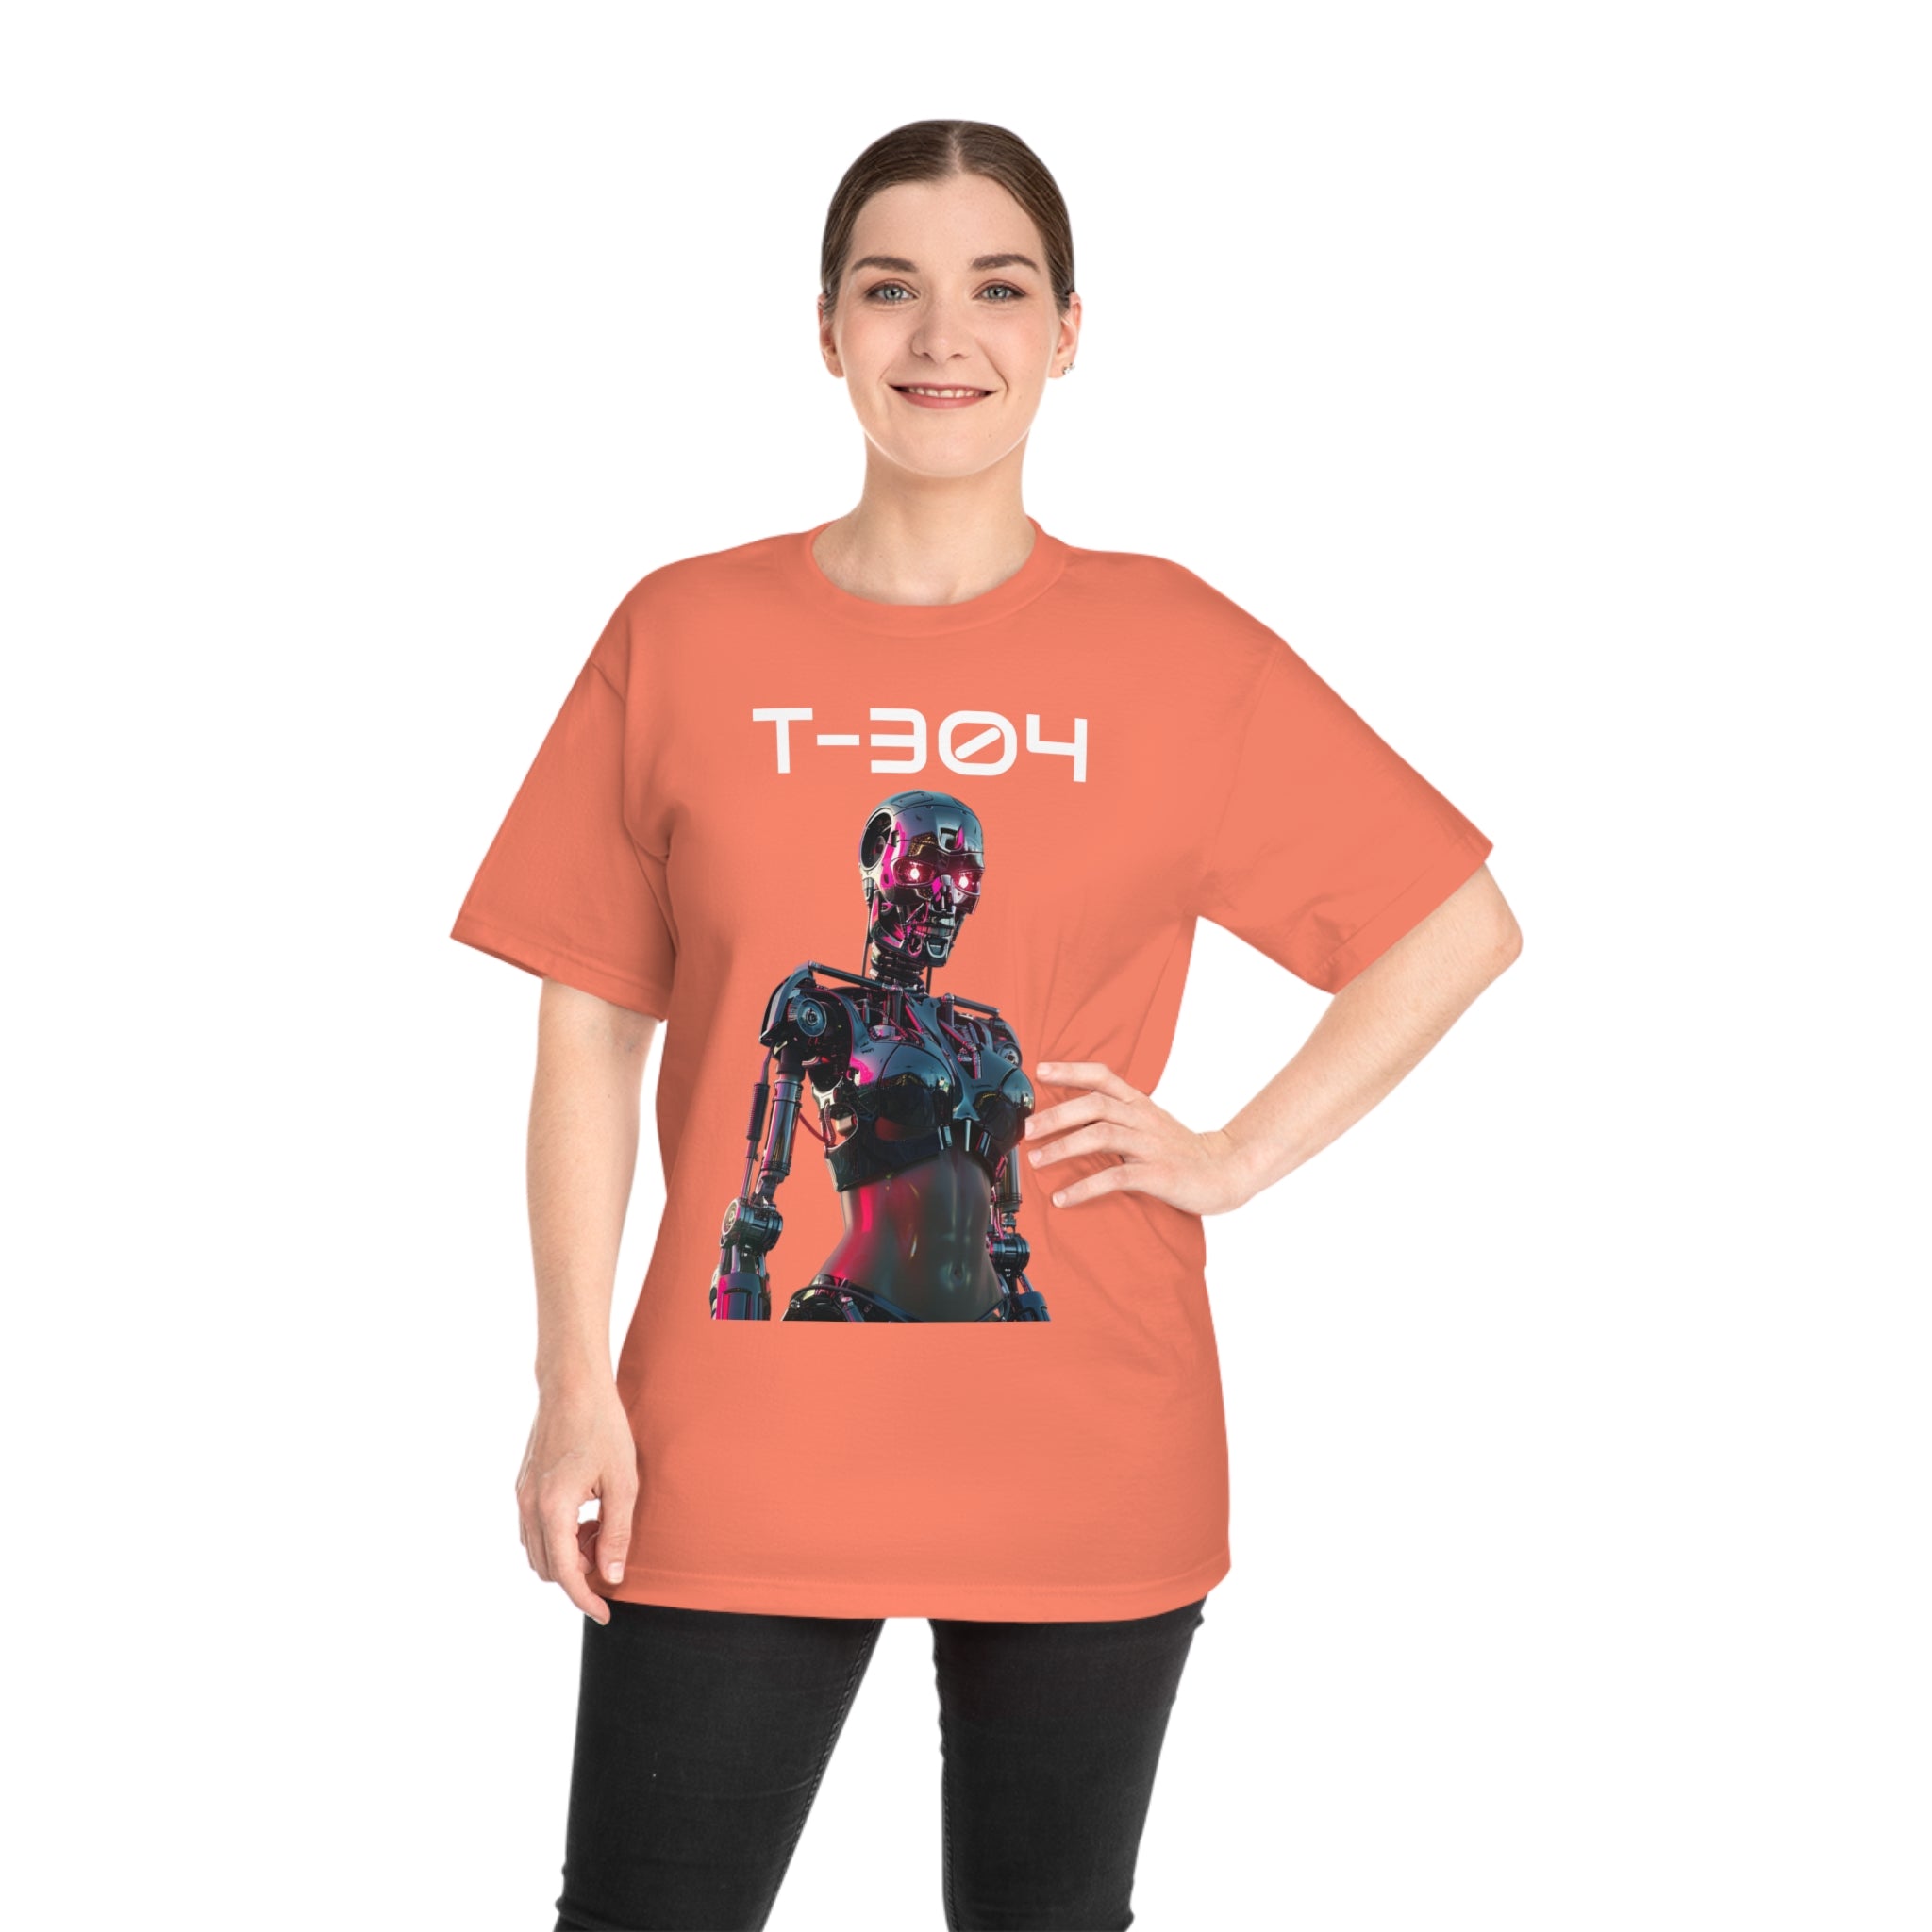 The image presents a sleek, unisex Hammer™ t-shirt, adorned with the T-304 Glam Gal in a vibrant, retro-futuristic design. The tee showcases a high-quality print that captures the essence of Terminator-inspired glam, set against the backdrop of the tee's premium fabric, signaling a perfect blend of comfort and iconic style.